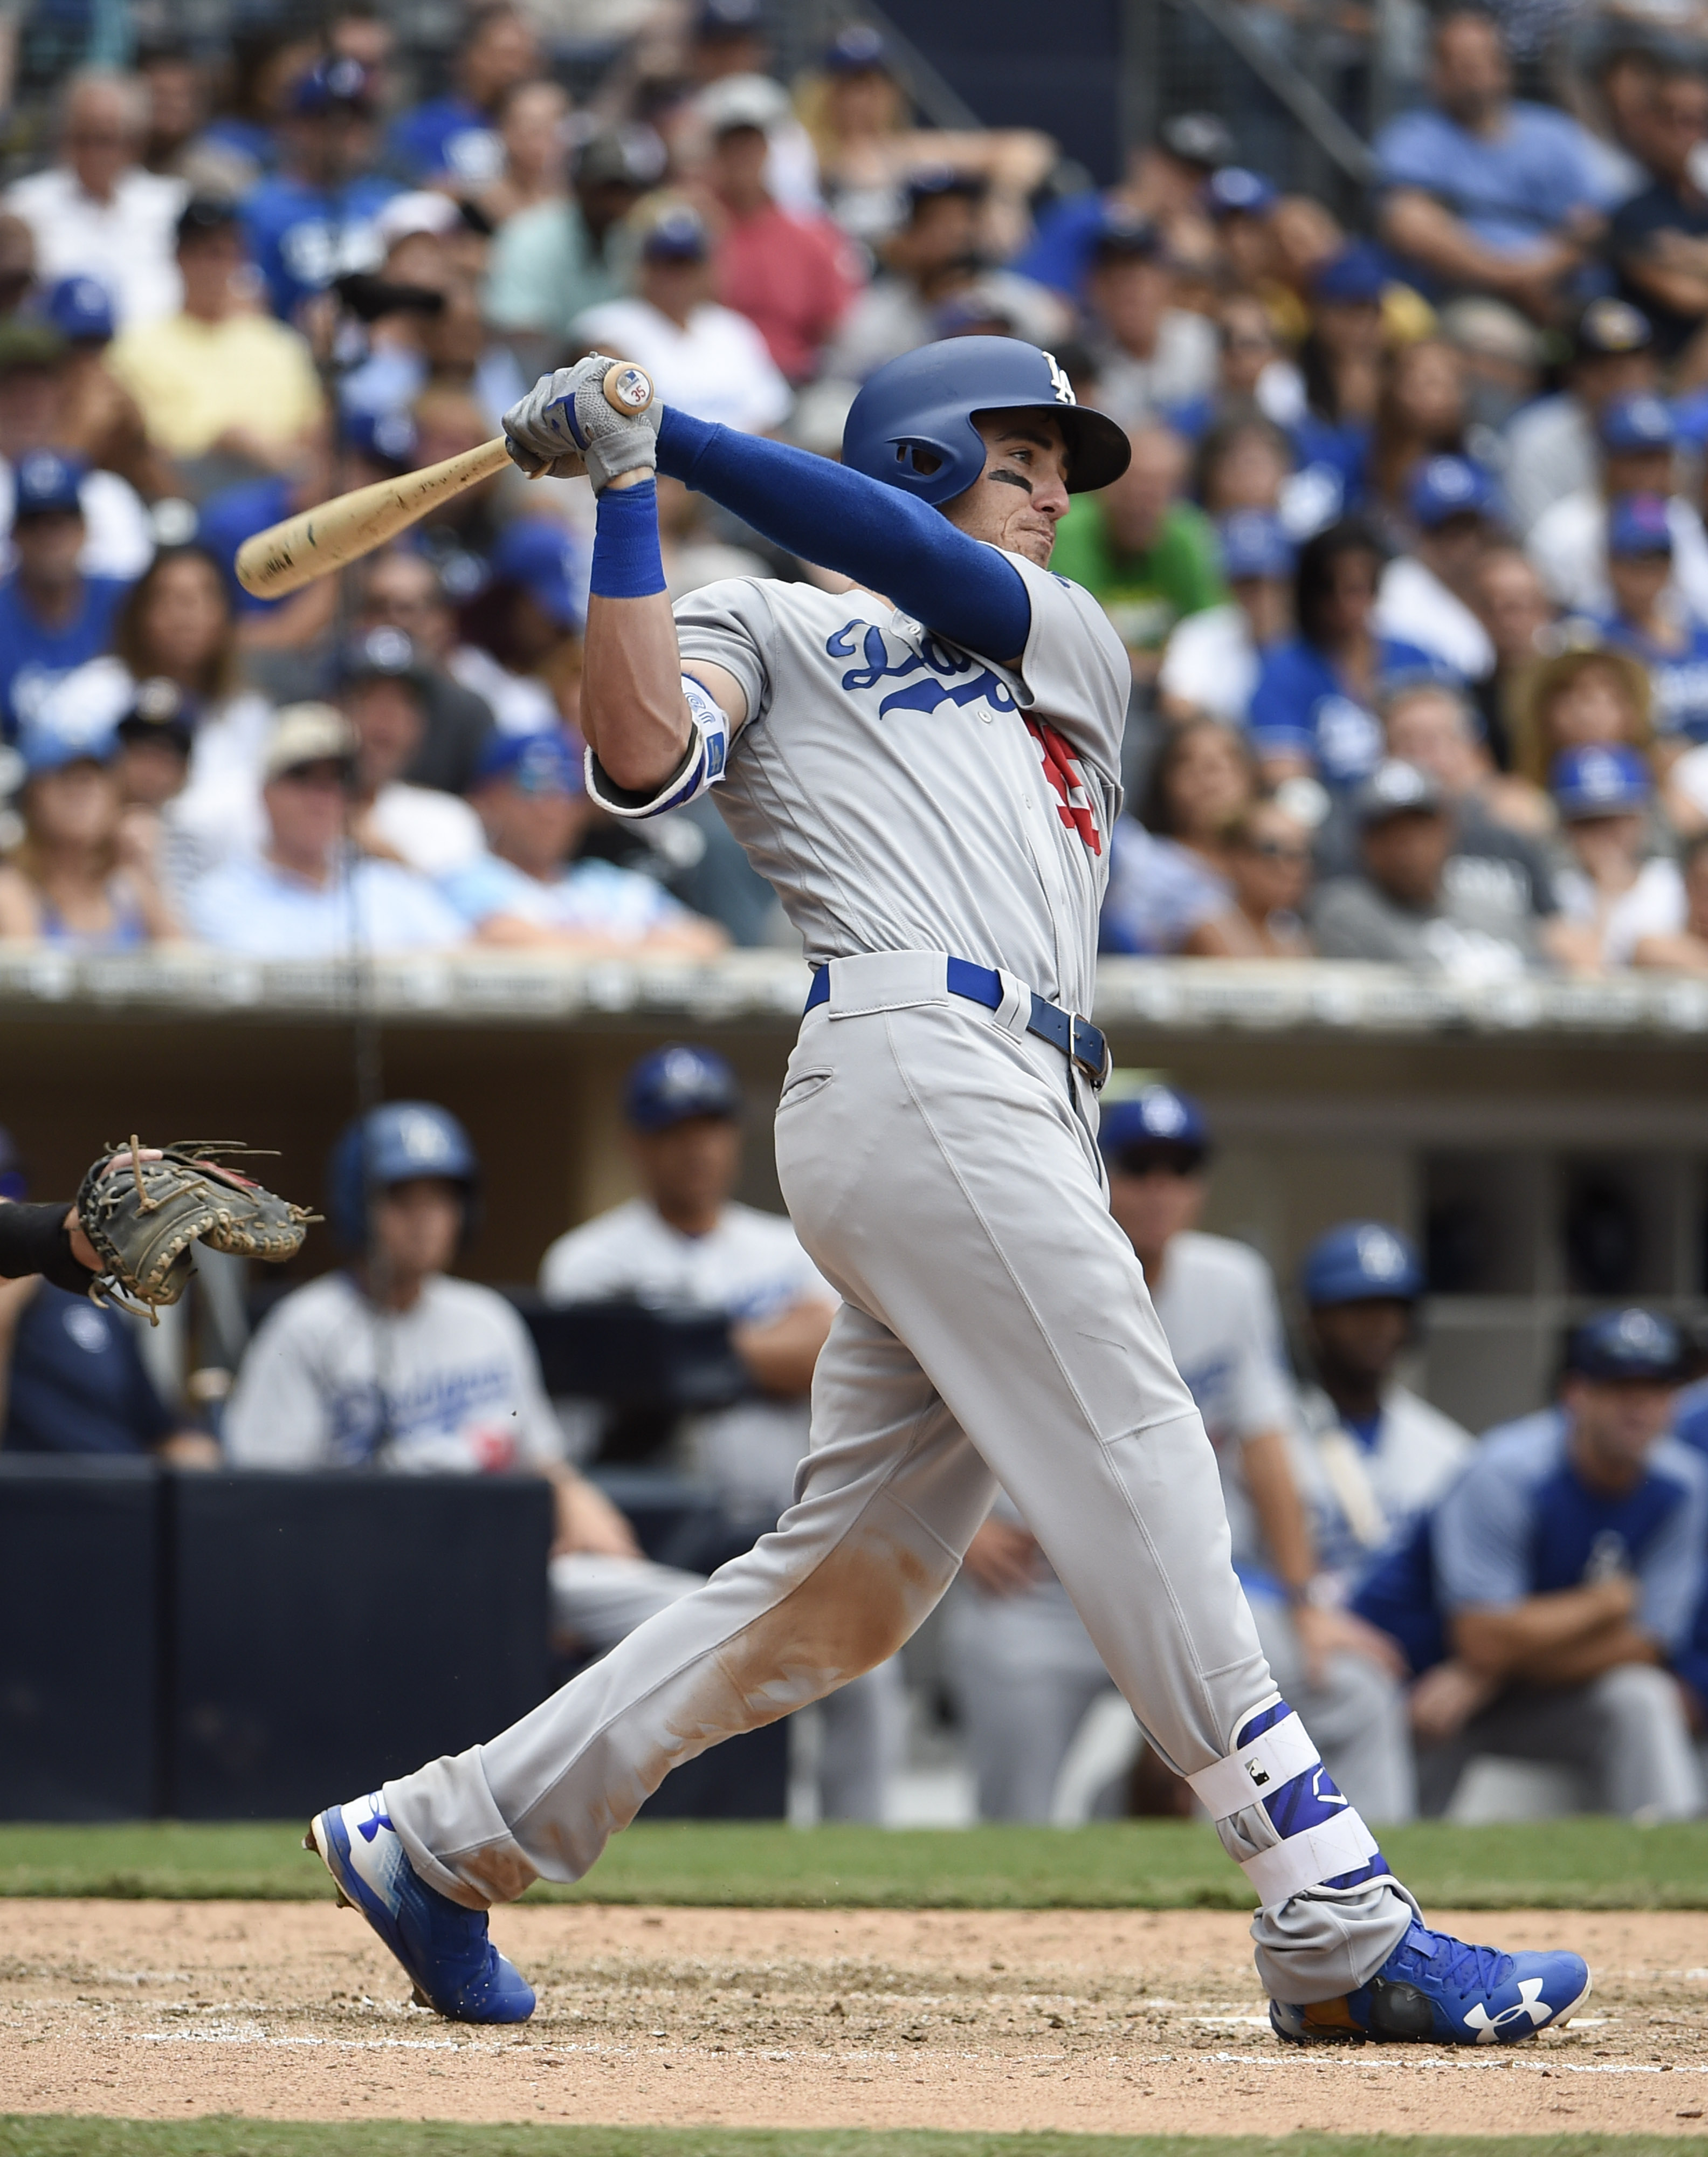 Cody Bellinger Hits His 39th Home Run to Break NL Rookie HR